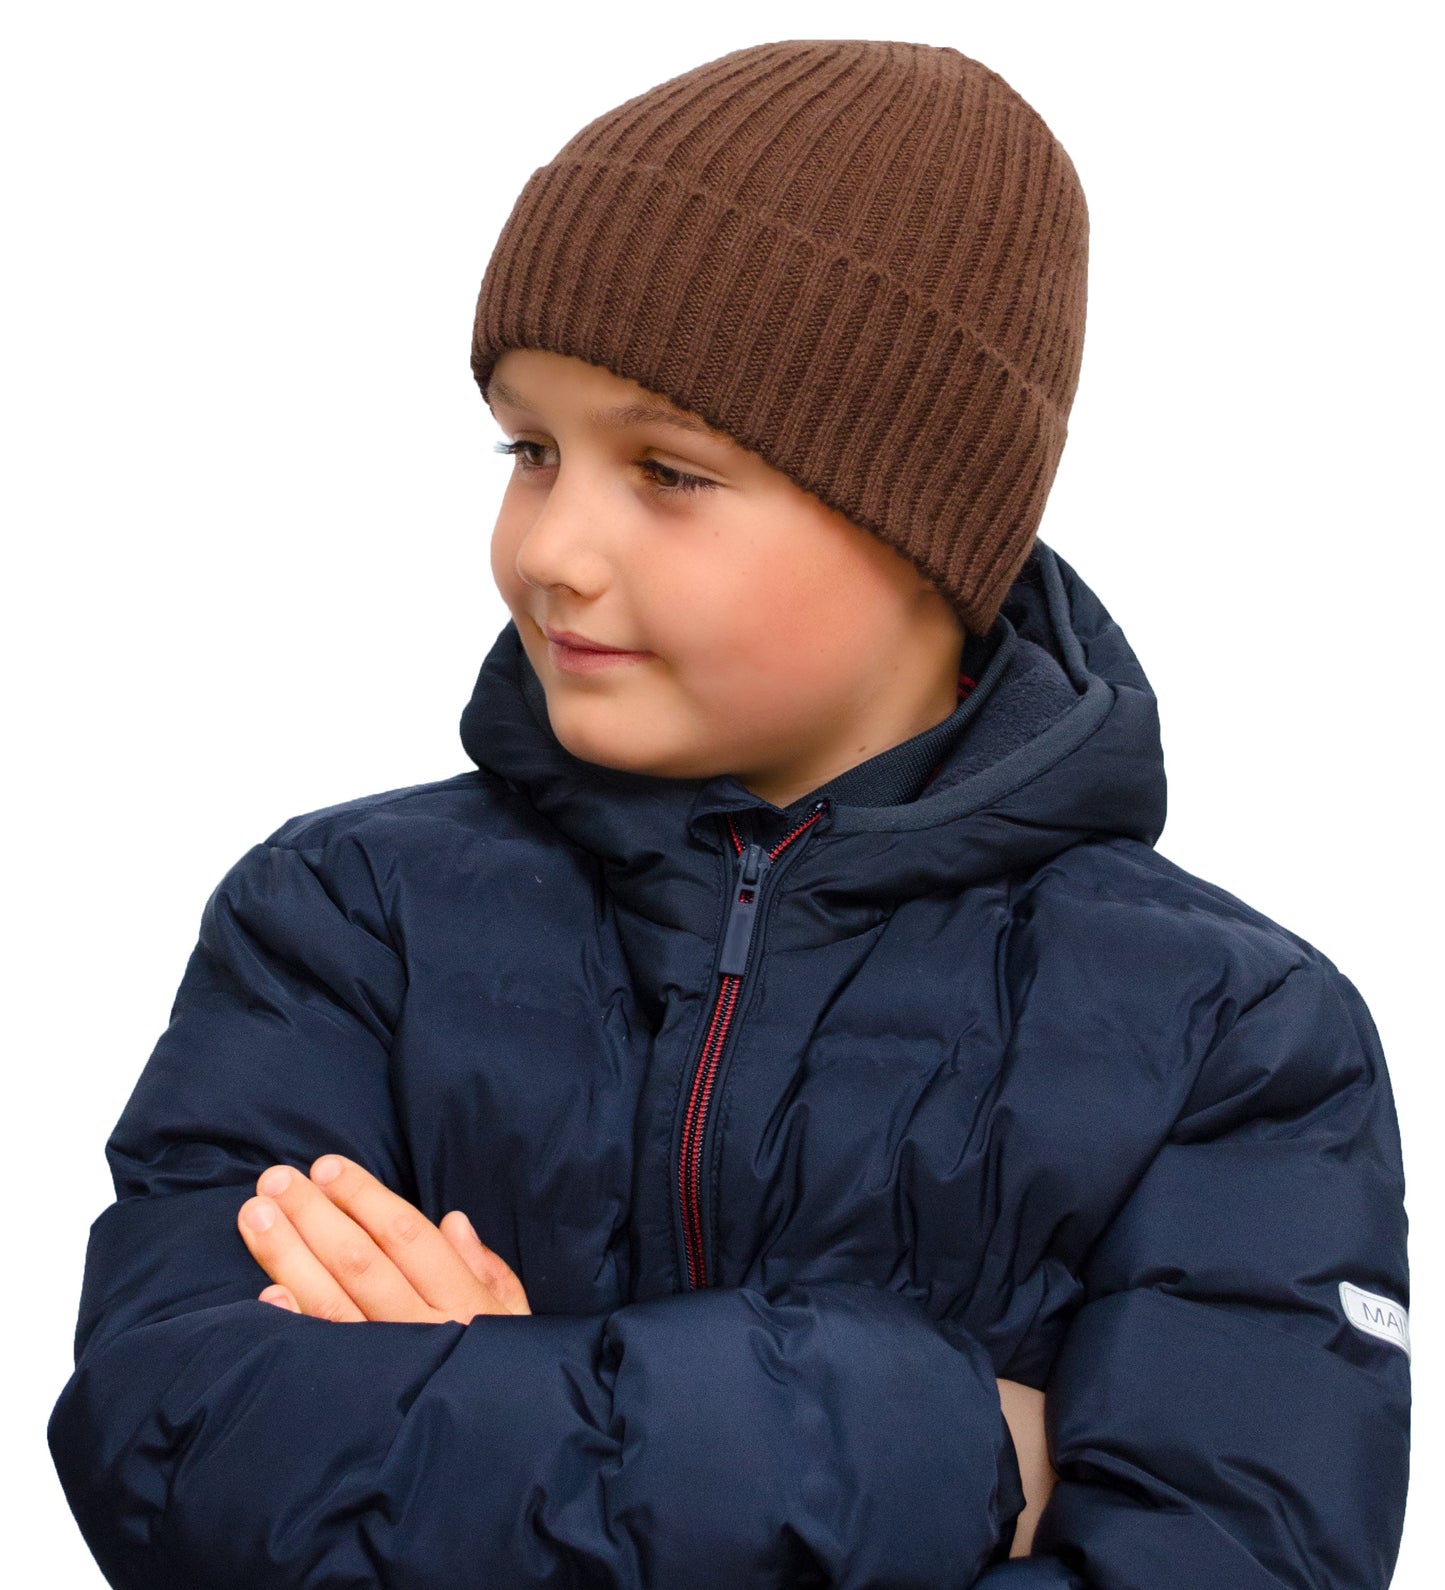 Boy’s Beanie Light Brown Winter Hat - Woolly Hats for Boys age 5, 6, 7, 8, 9, 10, 11, 12 y.o.